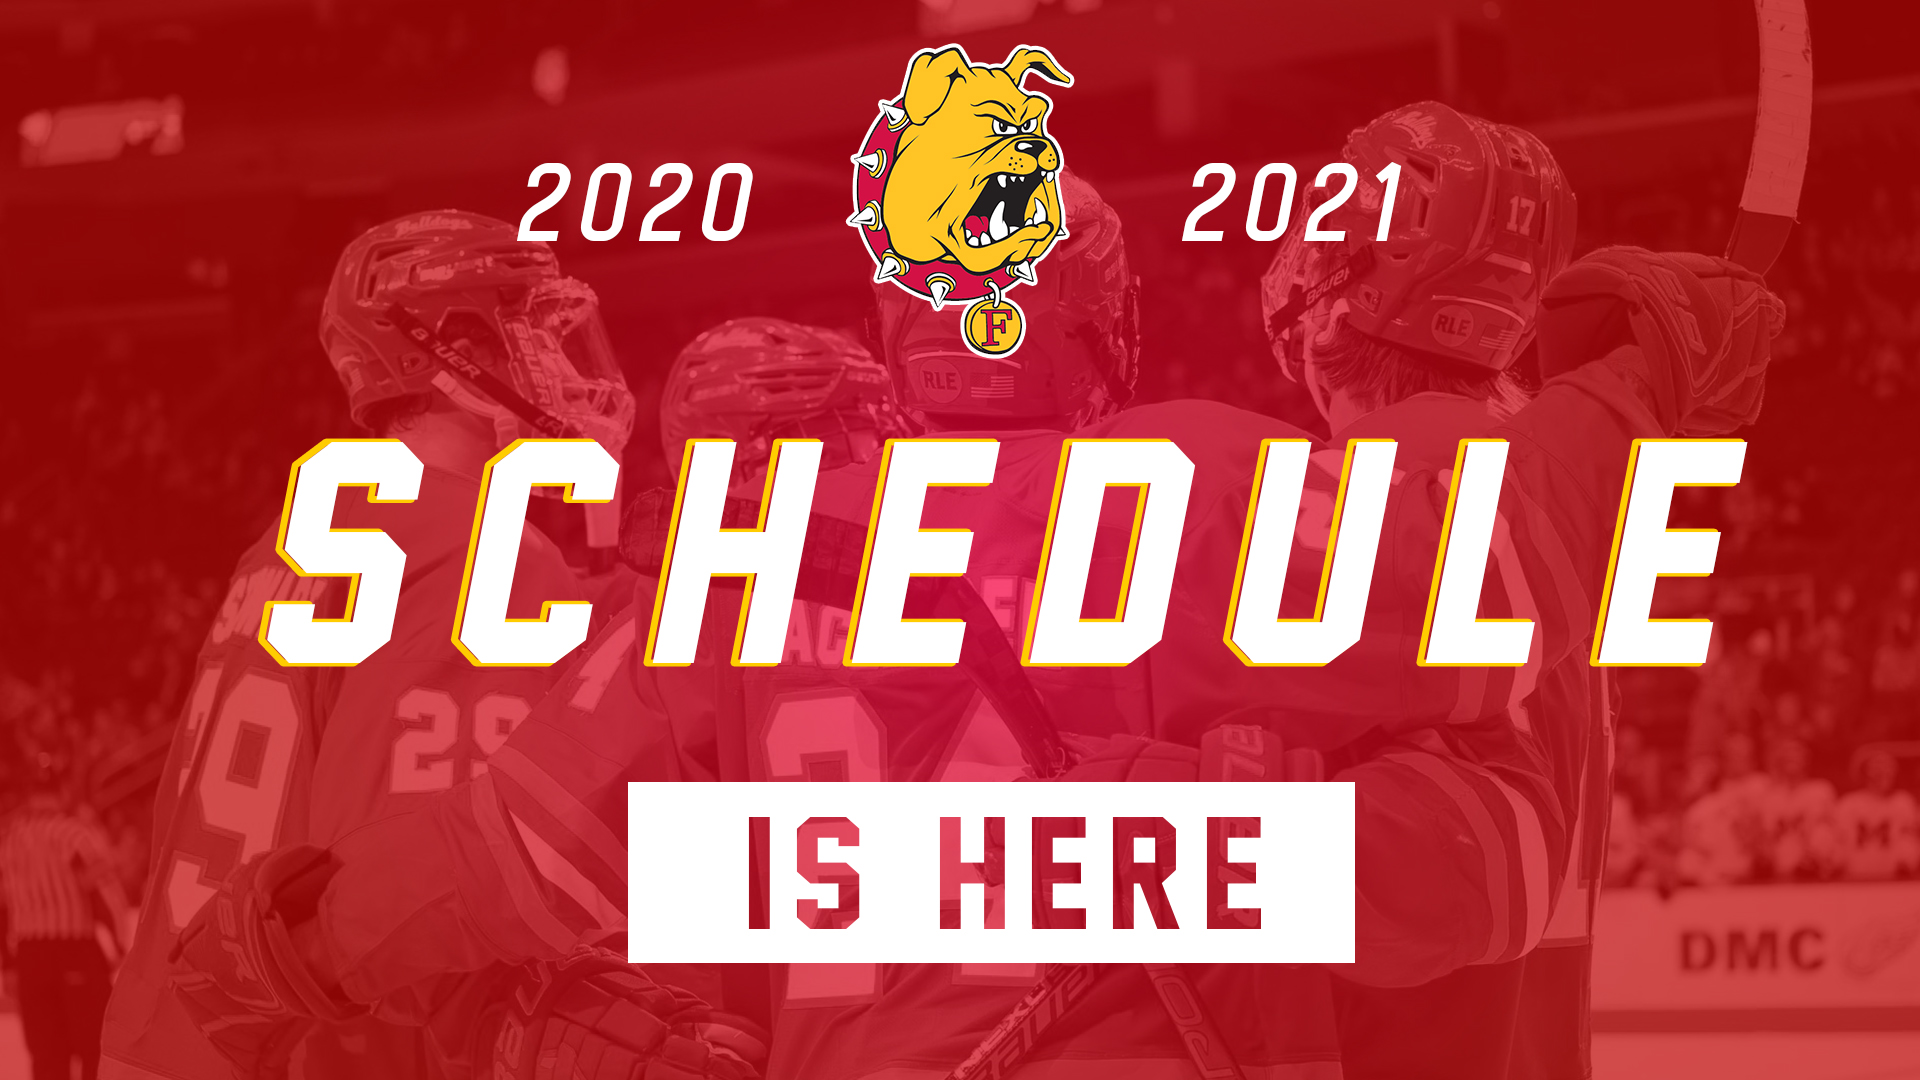 WCHA Announces 2020-21 Composite Schedule With Non-League Action Slated For Late November Start